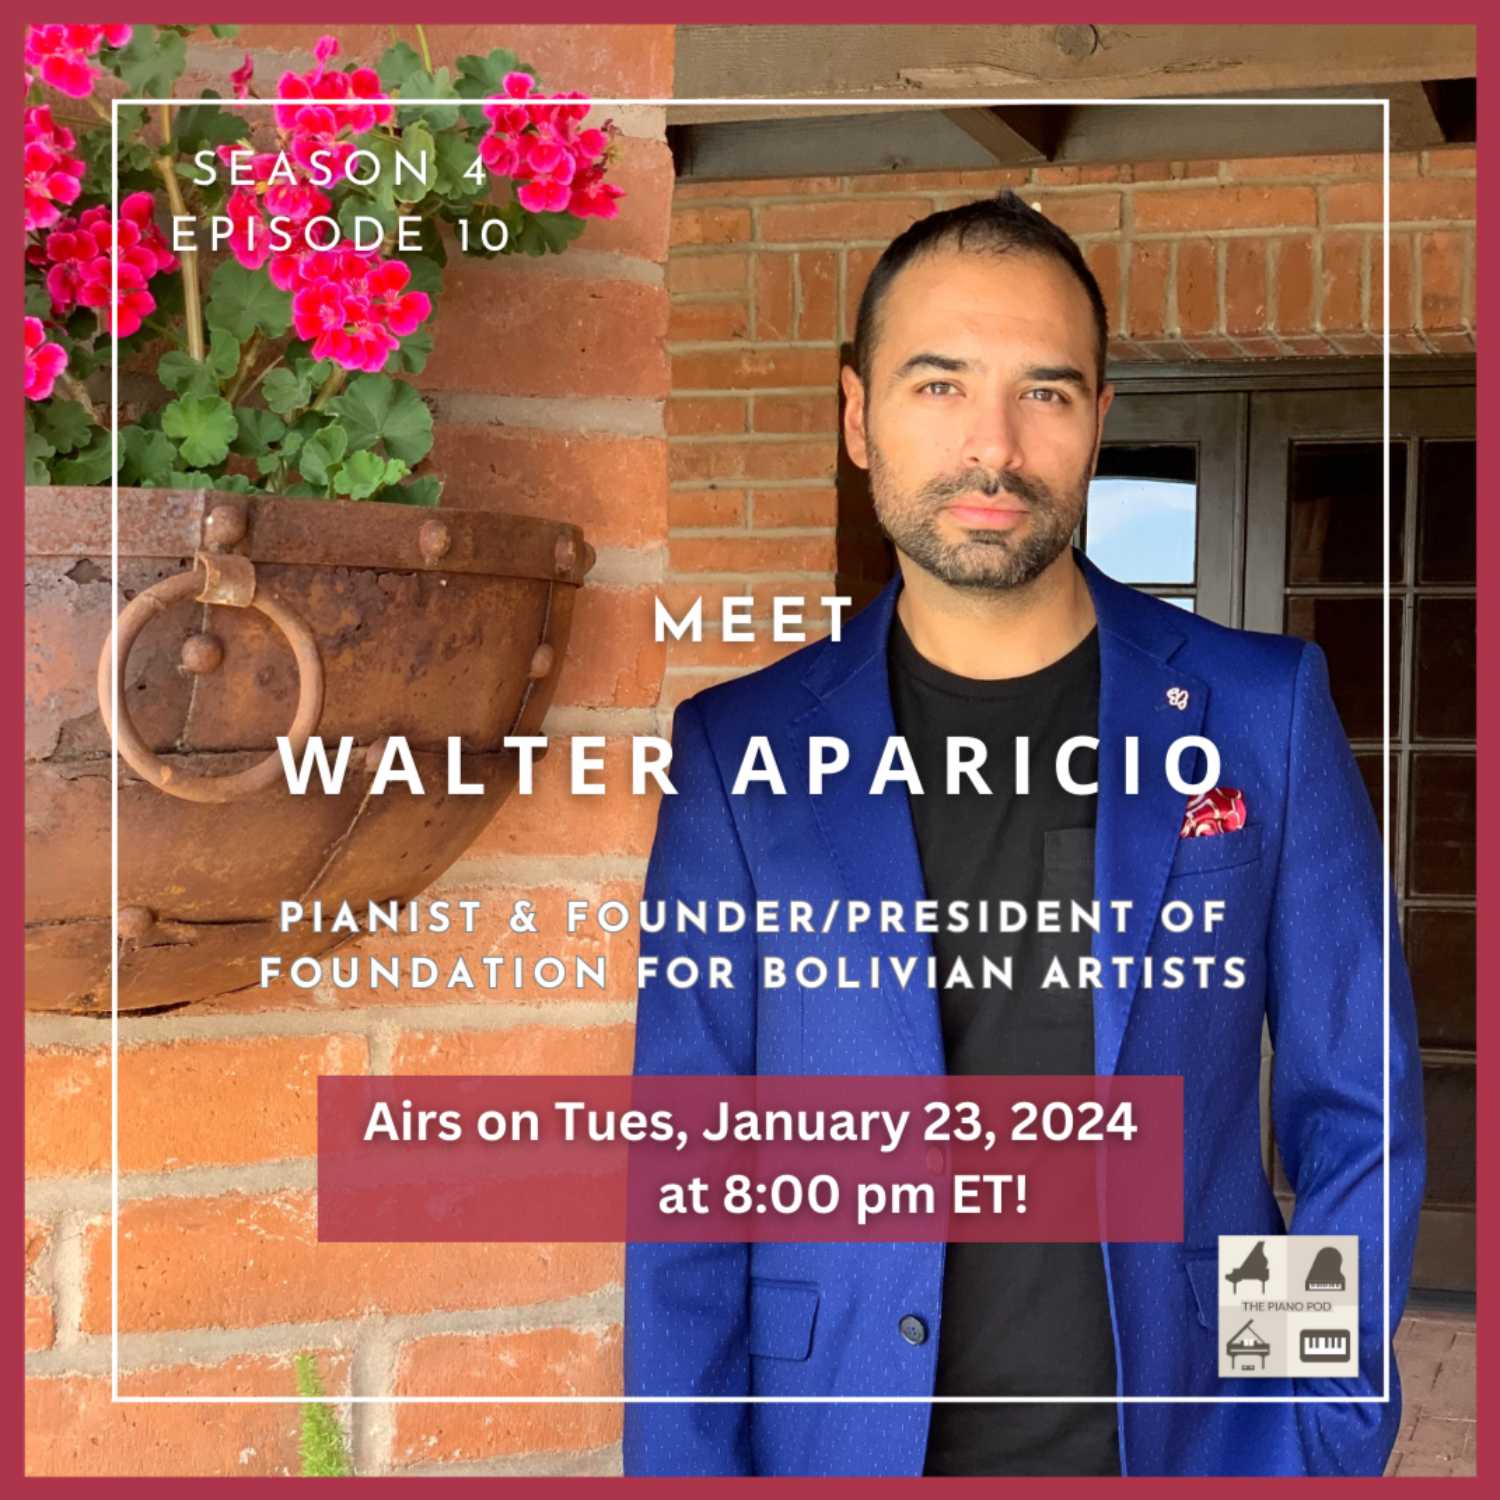 Trailer for Season 4 Episode 10: Walter Aparicio - Pianist, Educator, and Founder/President of Foundation for Bolivian Artists